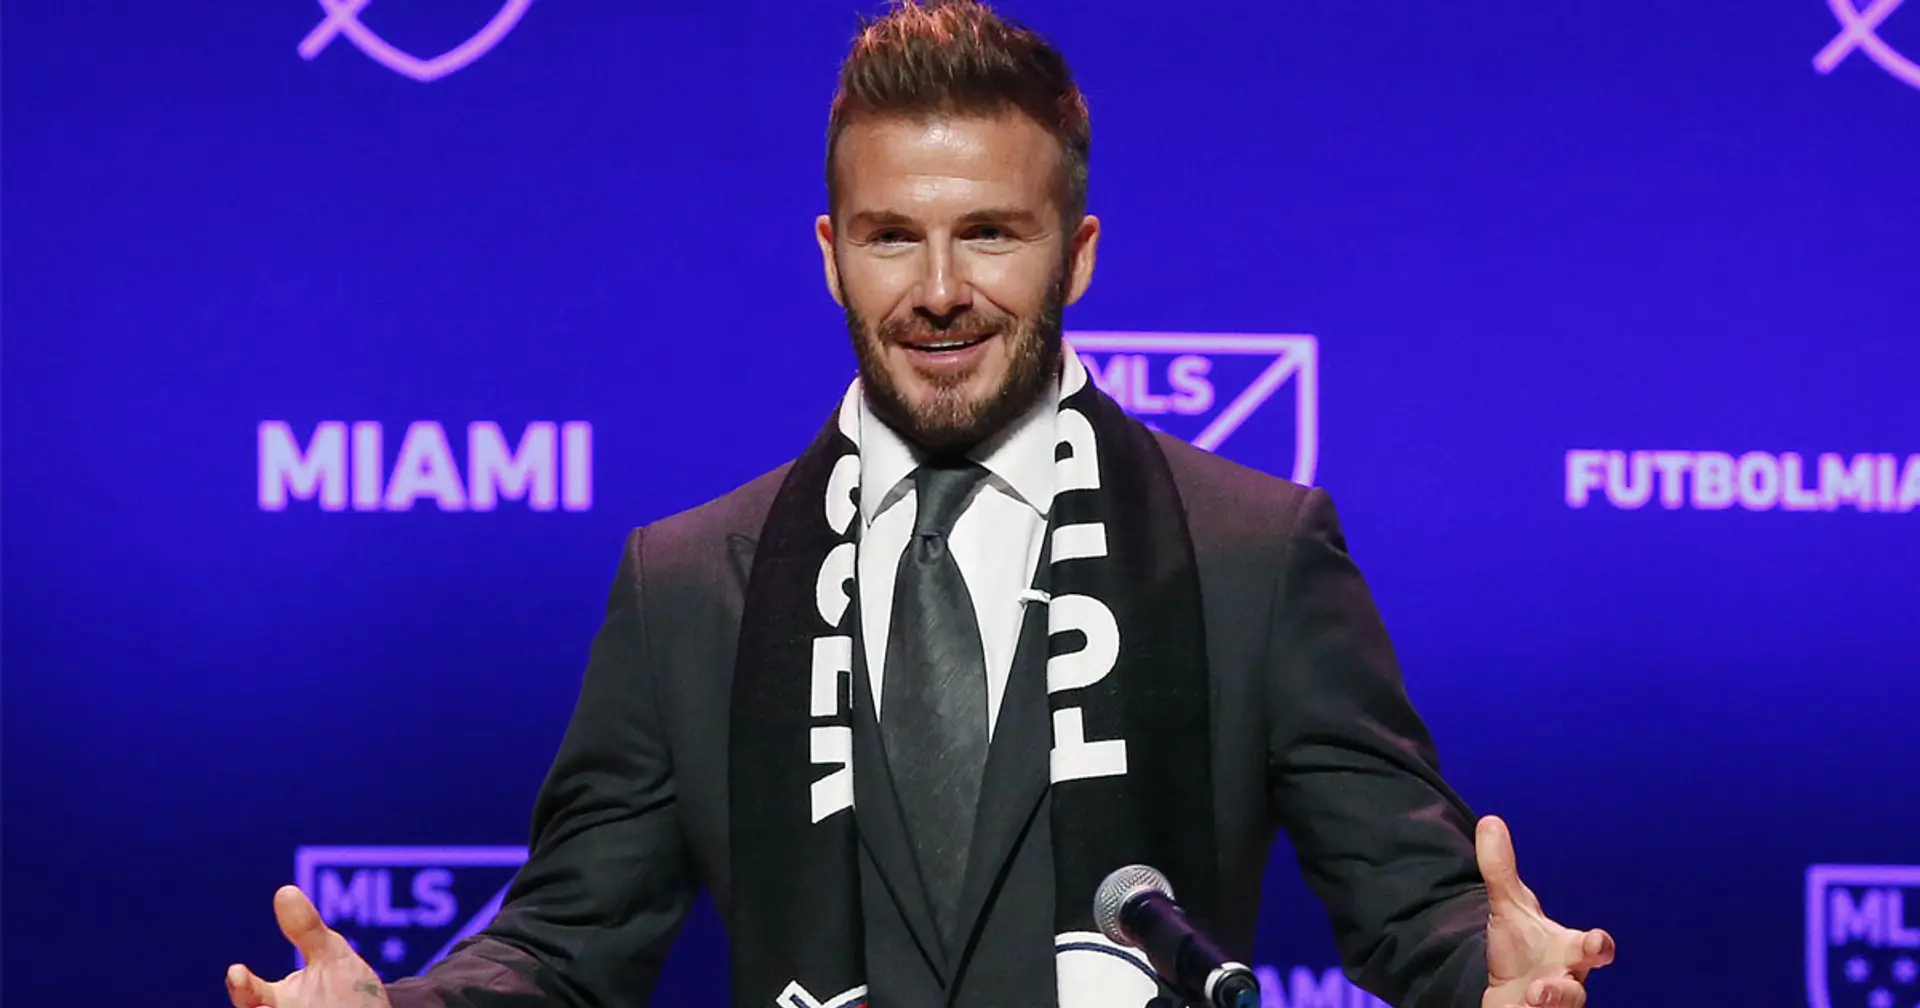 ‘Man United & Real Madrid wasn’t built in a day’: David Beckham reacts to Inter Miami's unfortunate record in MLS